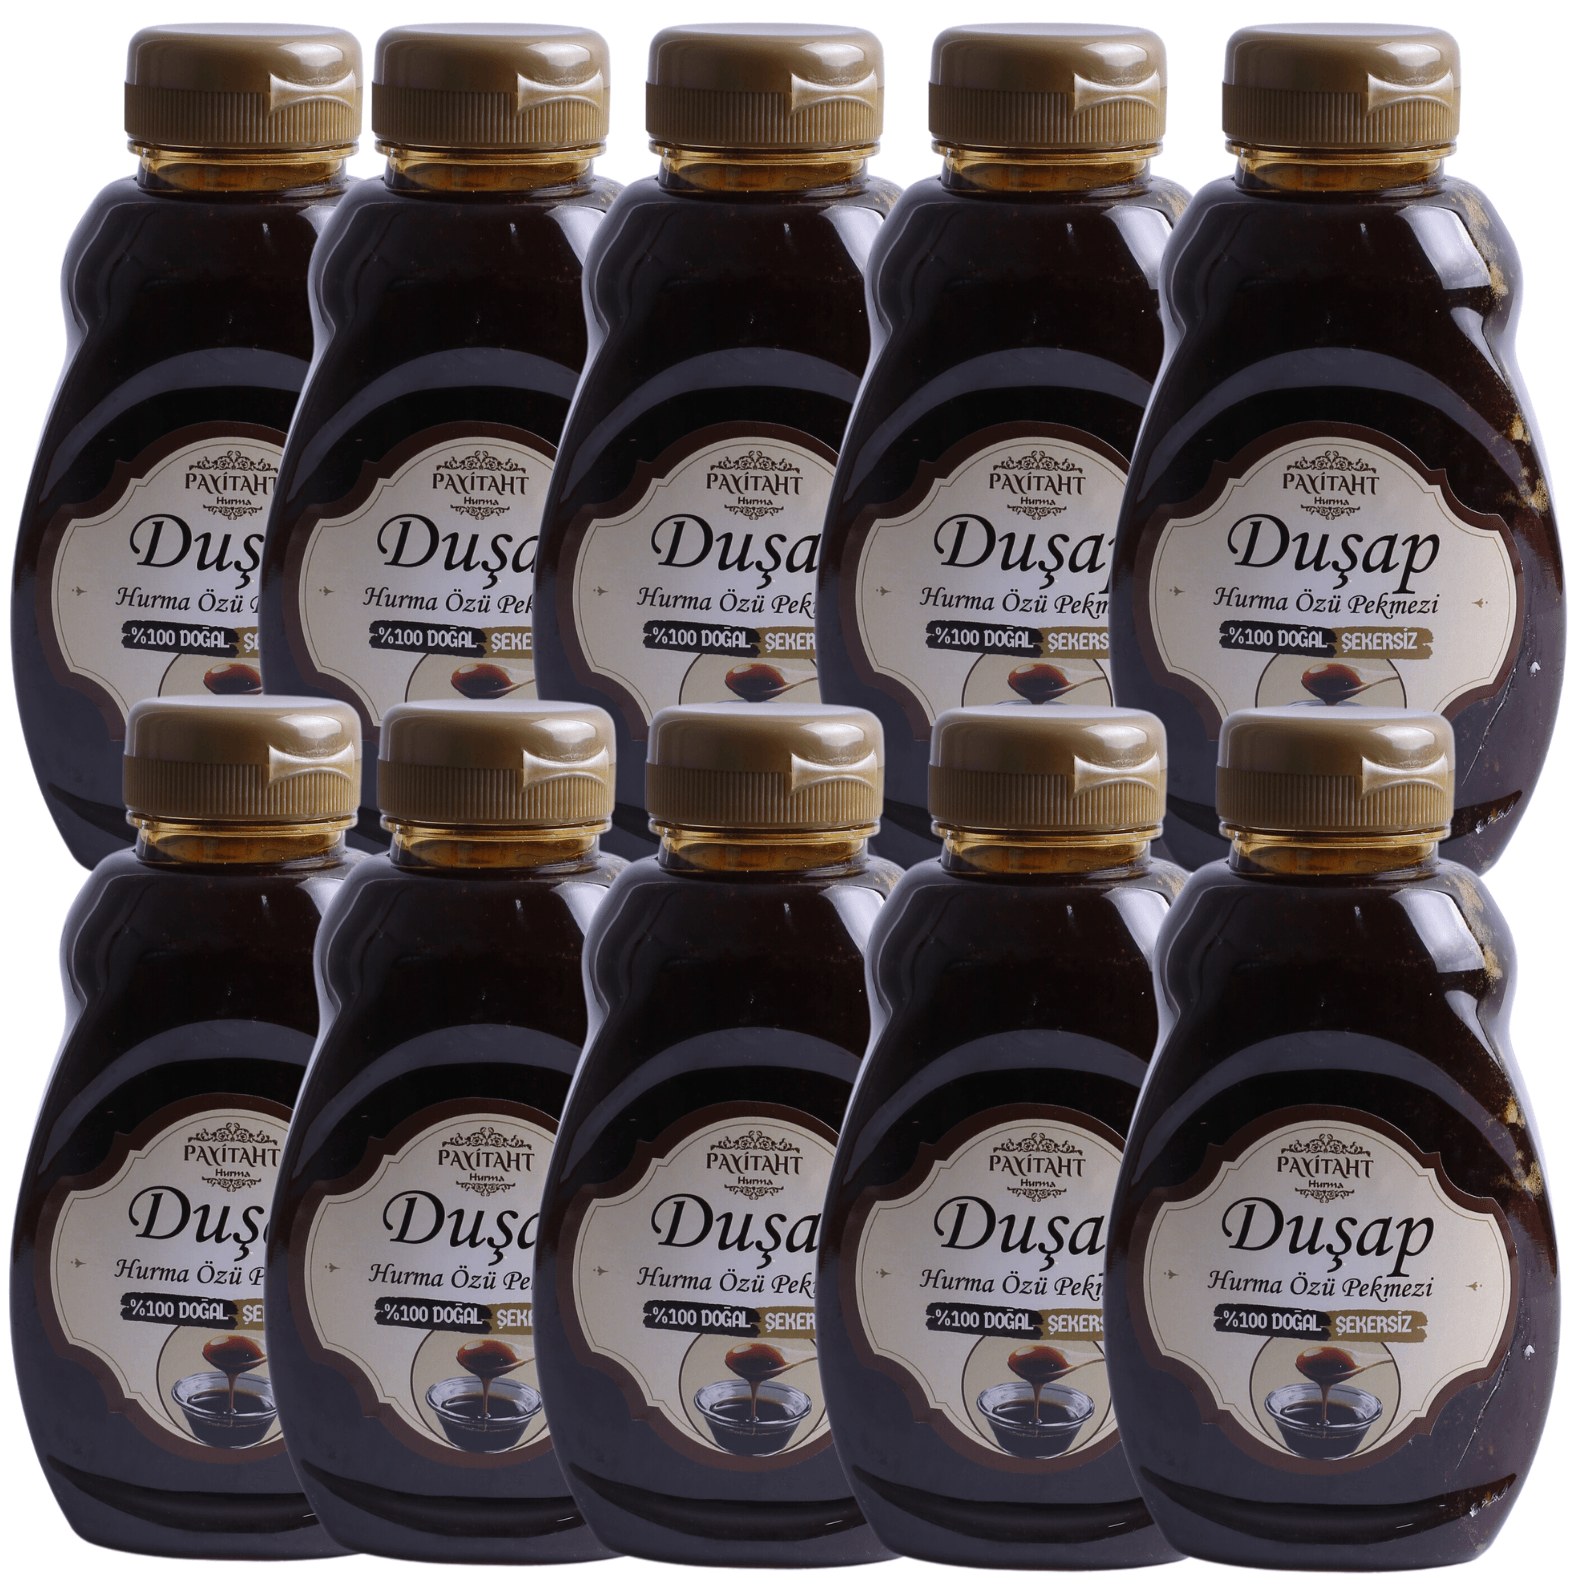 PAYITAHT HURMA- DATE PALM EXTRACT MOLASSES 450 GR SUGAR-FREE SQUEEZE 10 PACKAGE